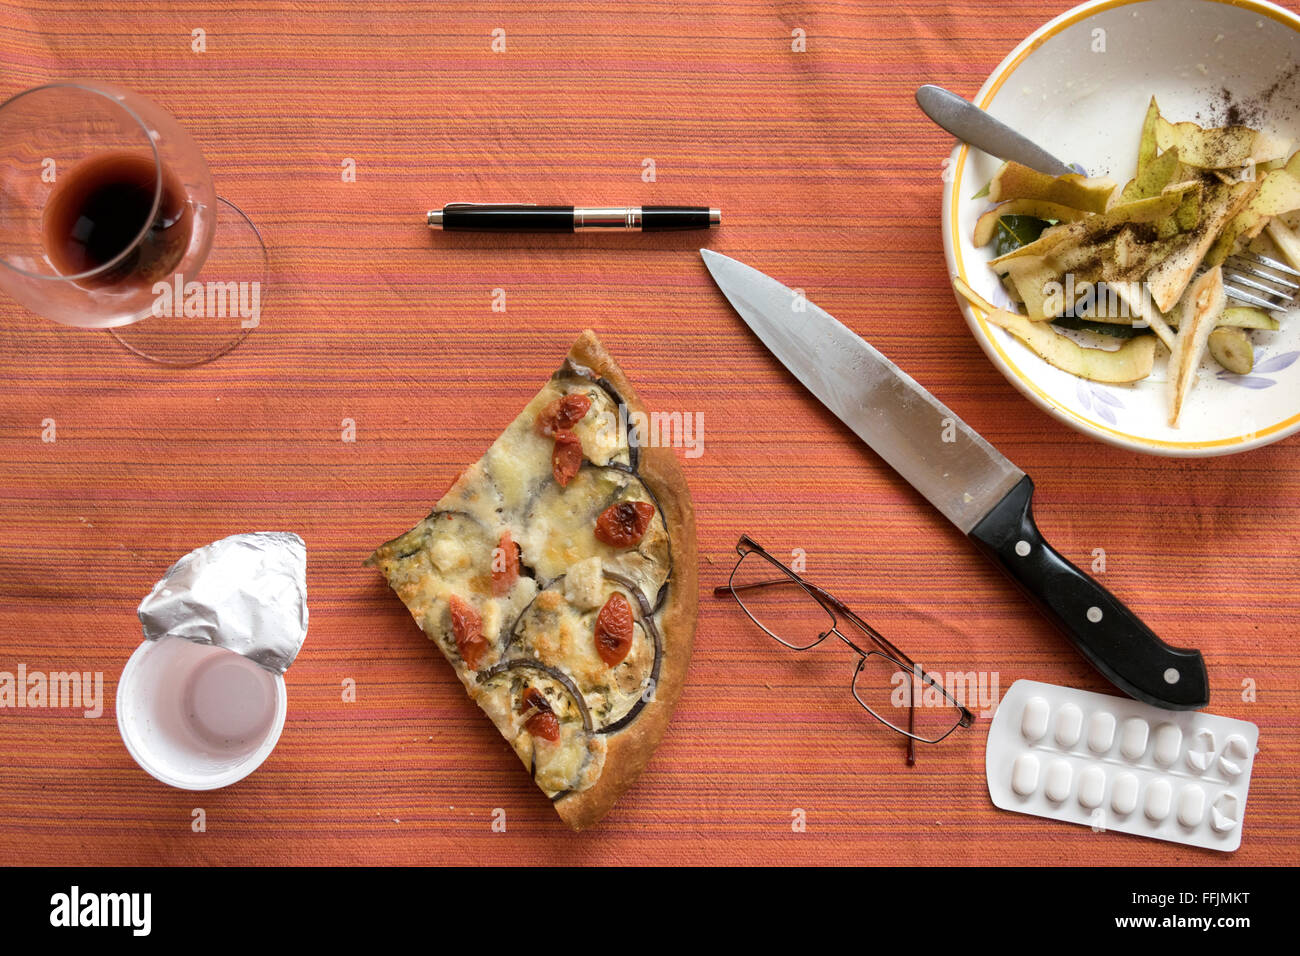 concept of the end of a lunch break in a flat lay photography Stock Photo